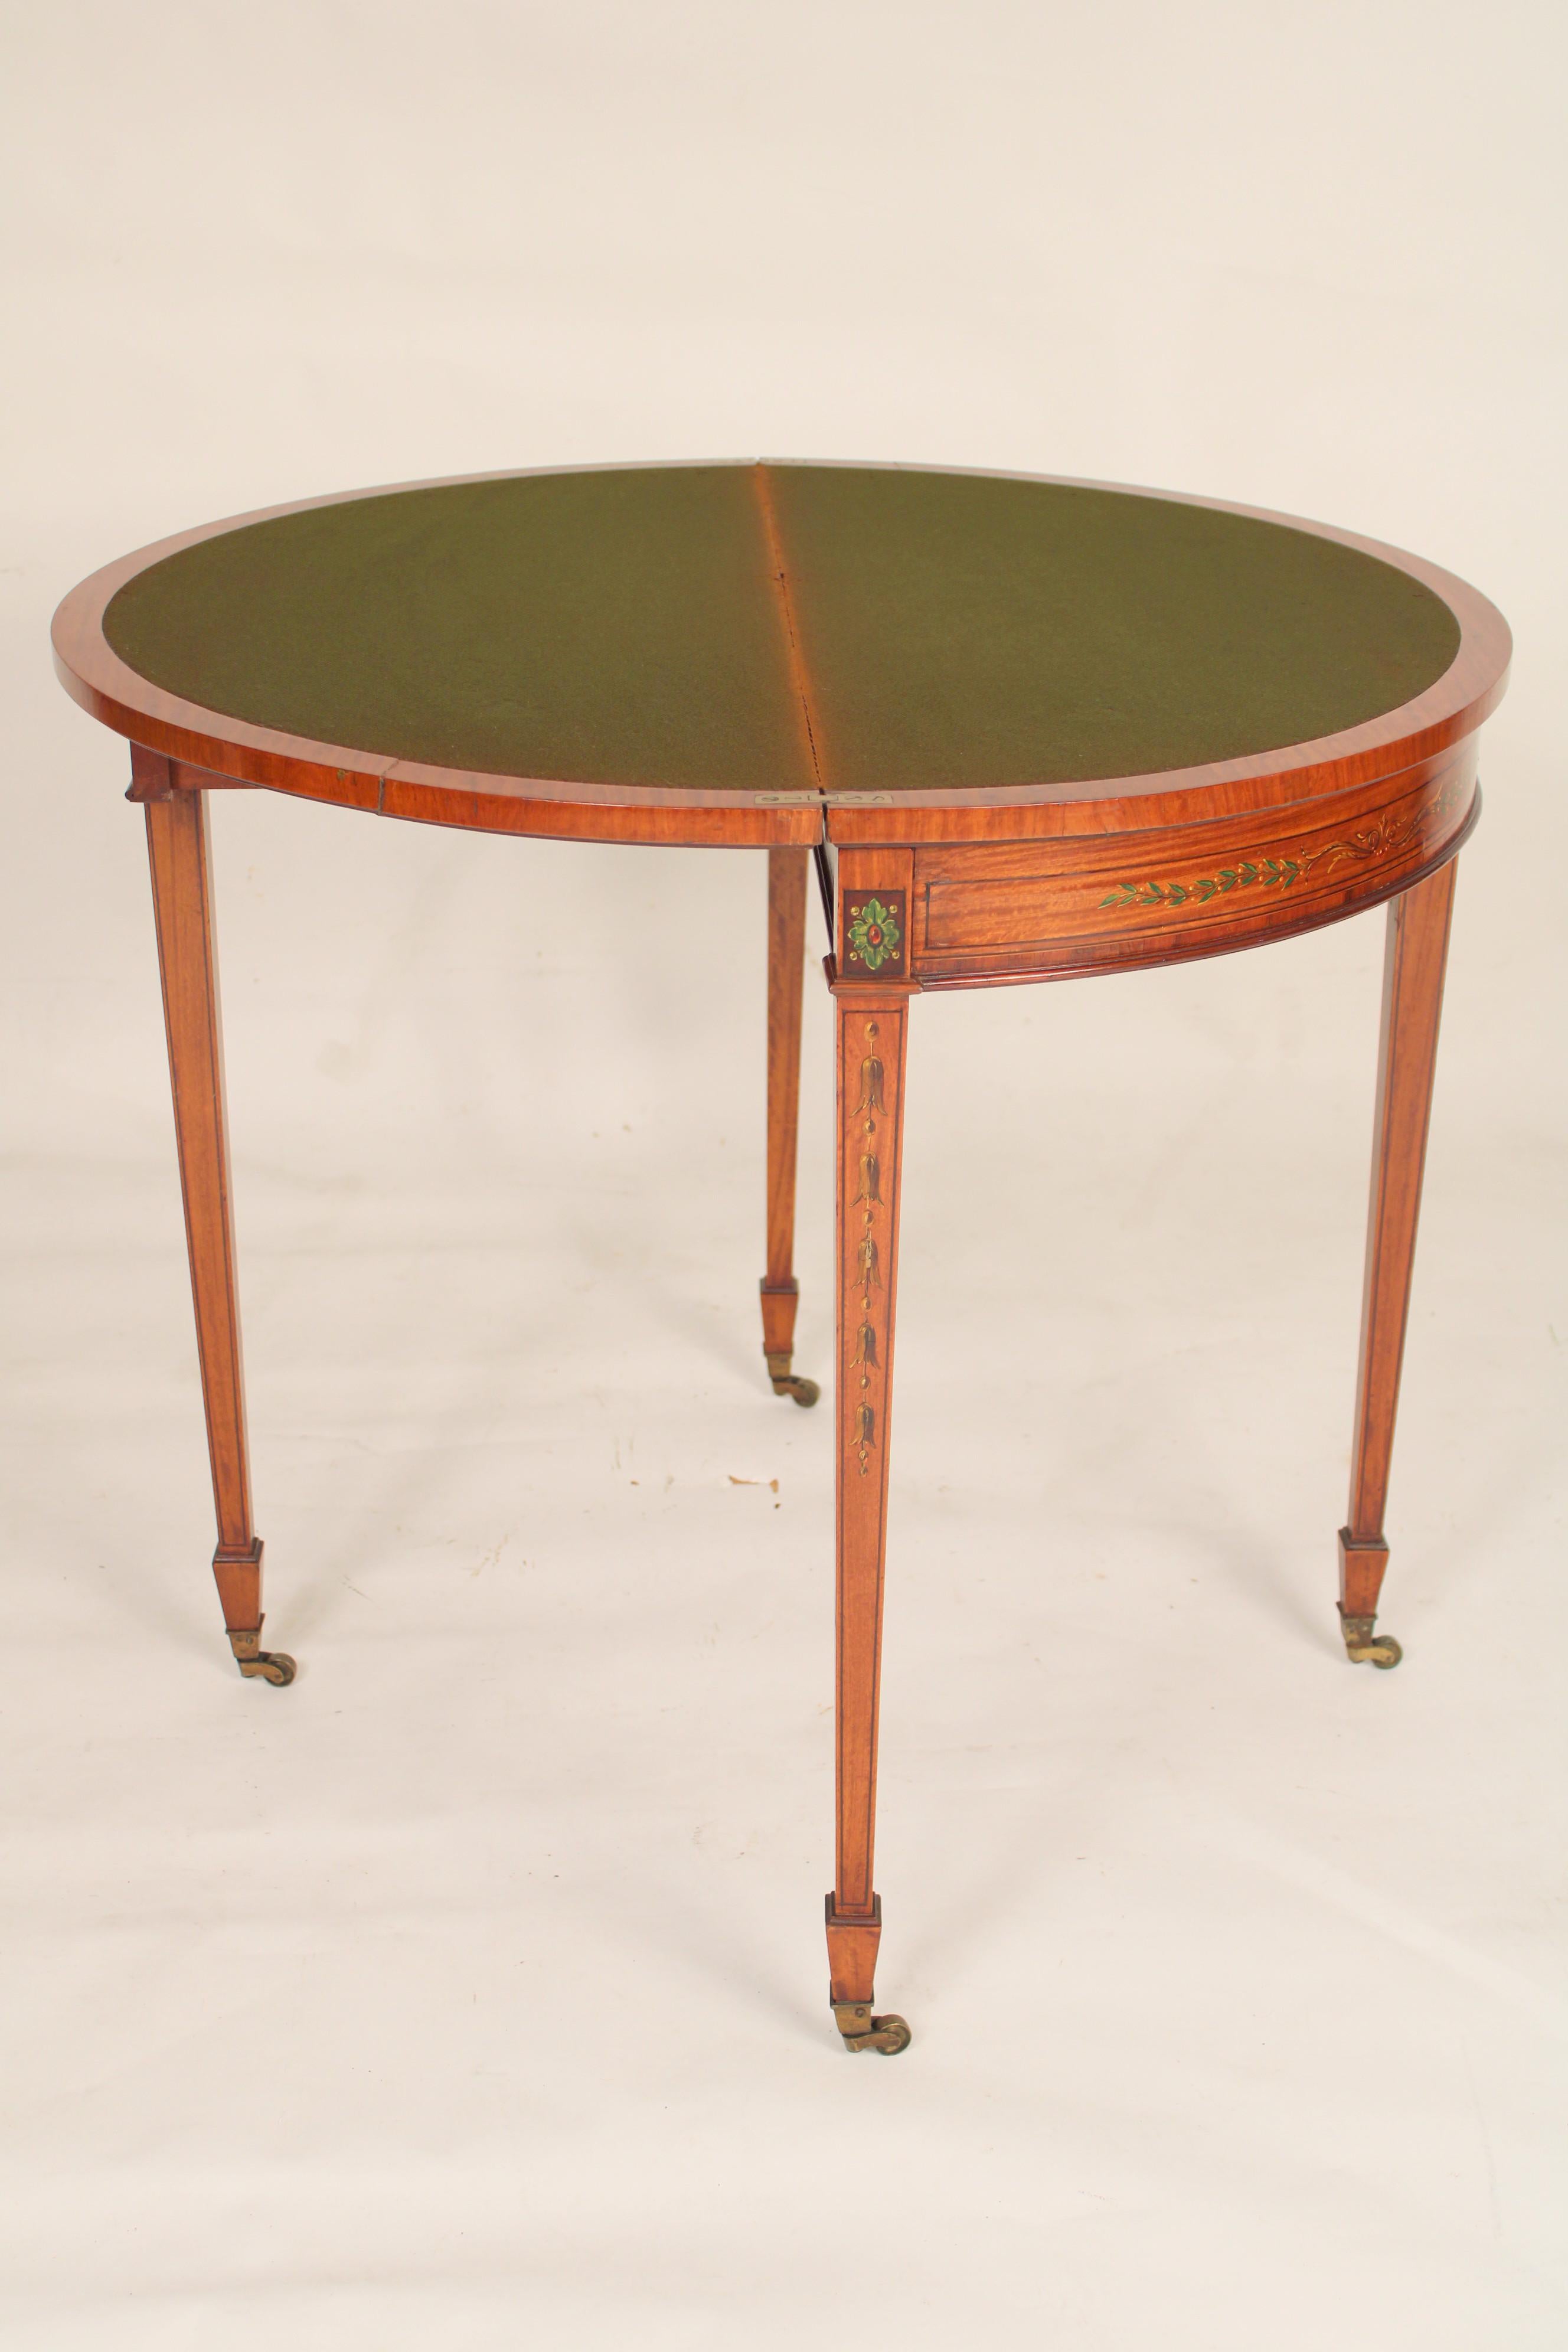 Brass English Edwardian Painted Satin Wood Games Table For Sale